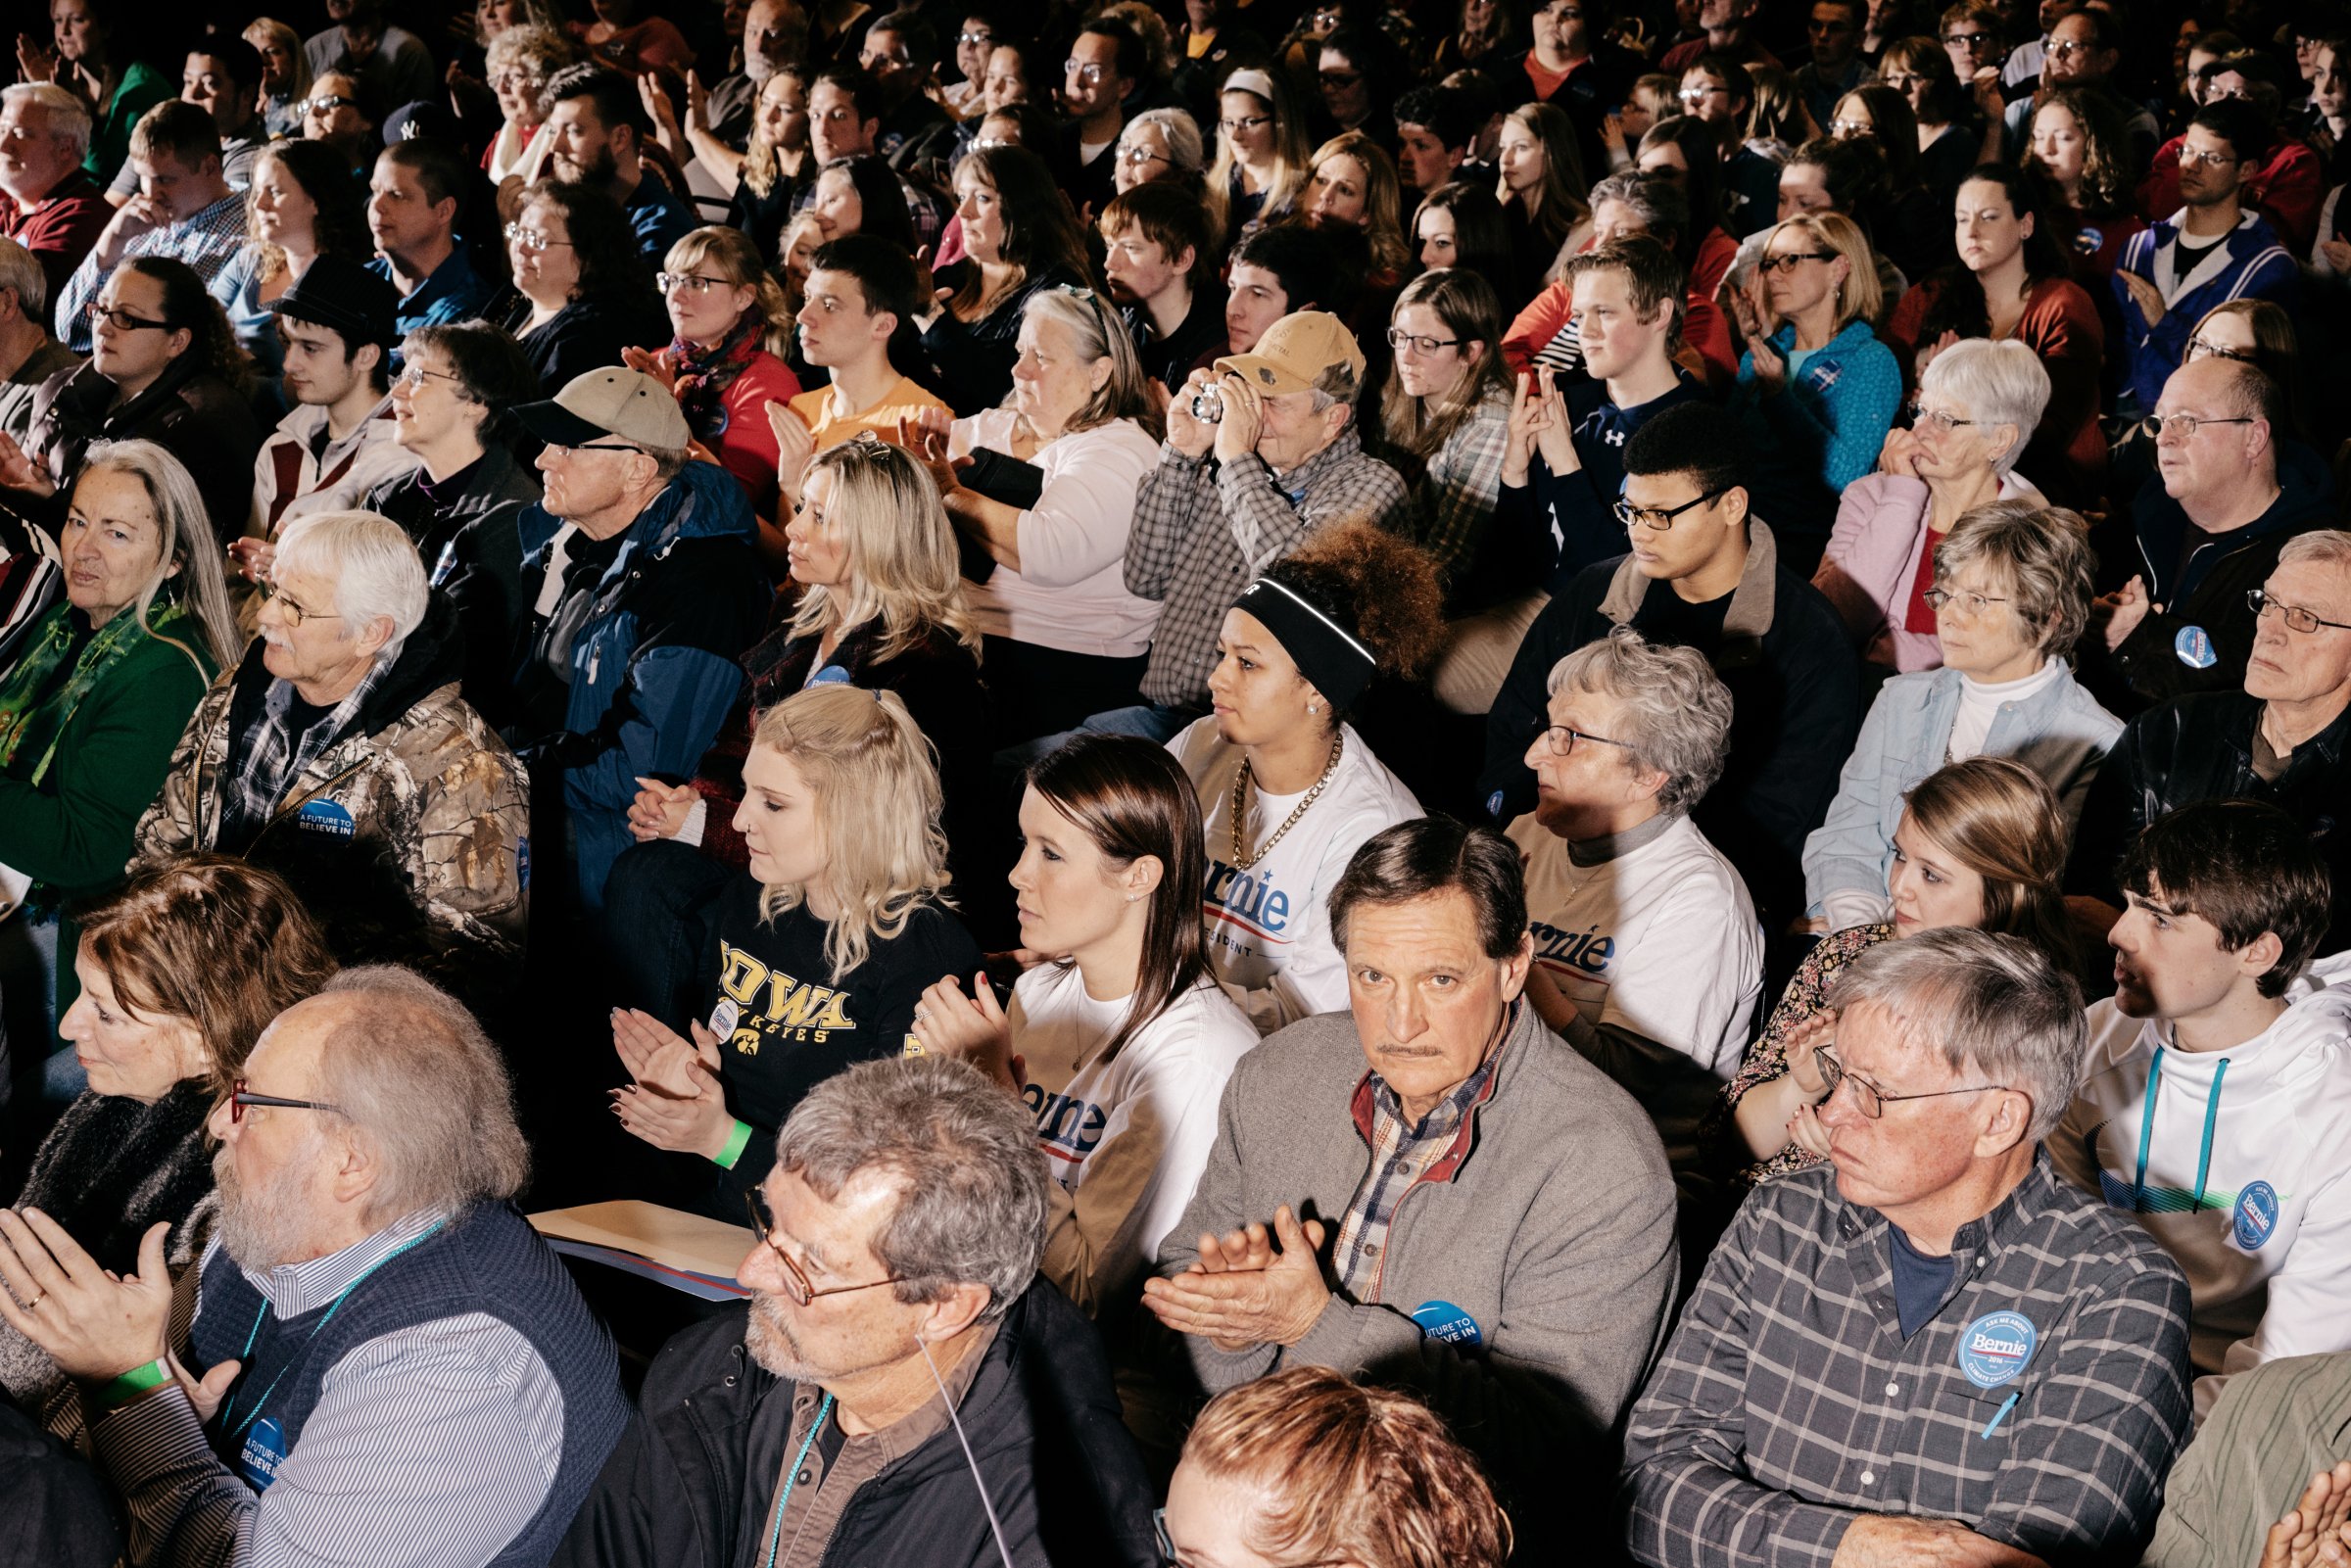 TIMEPOL Supporters clap at a campaign event in Iowa on Jan. 24, 2016.